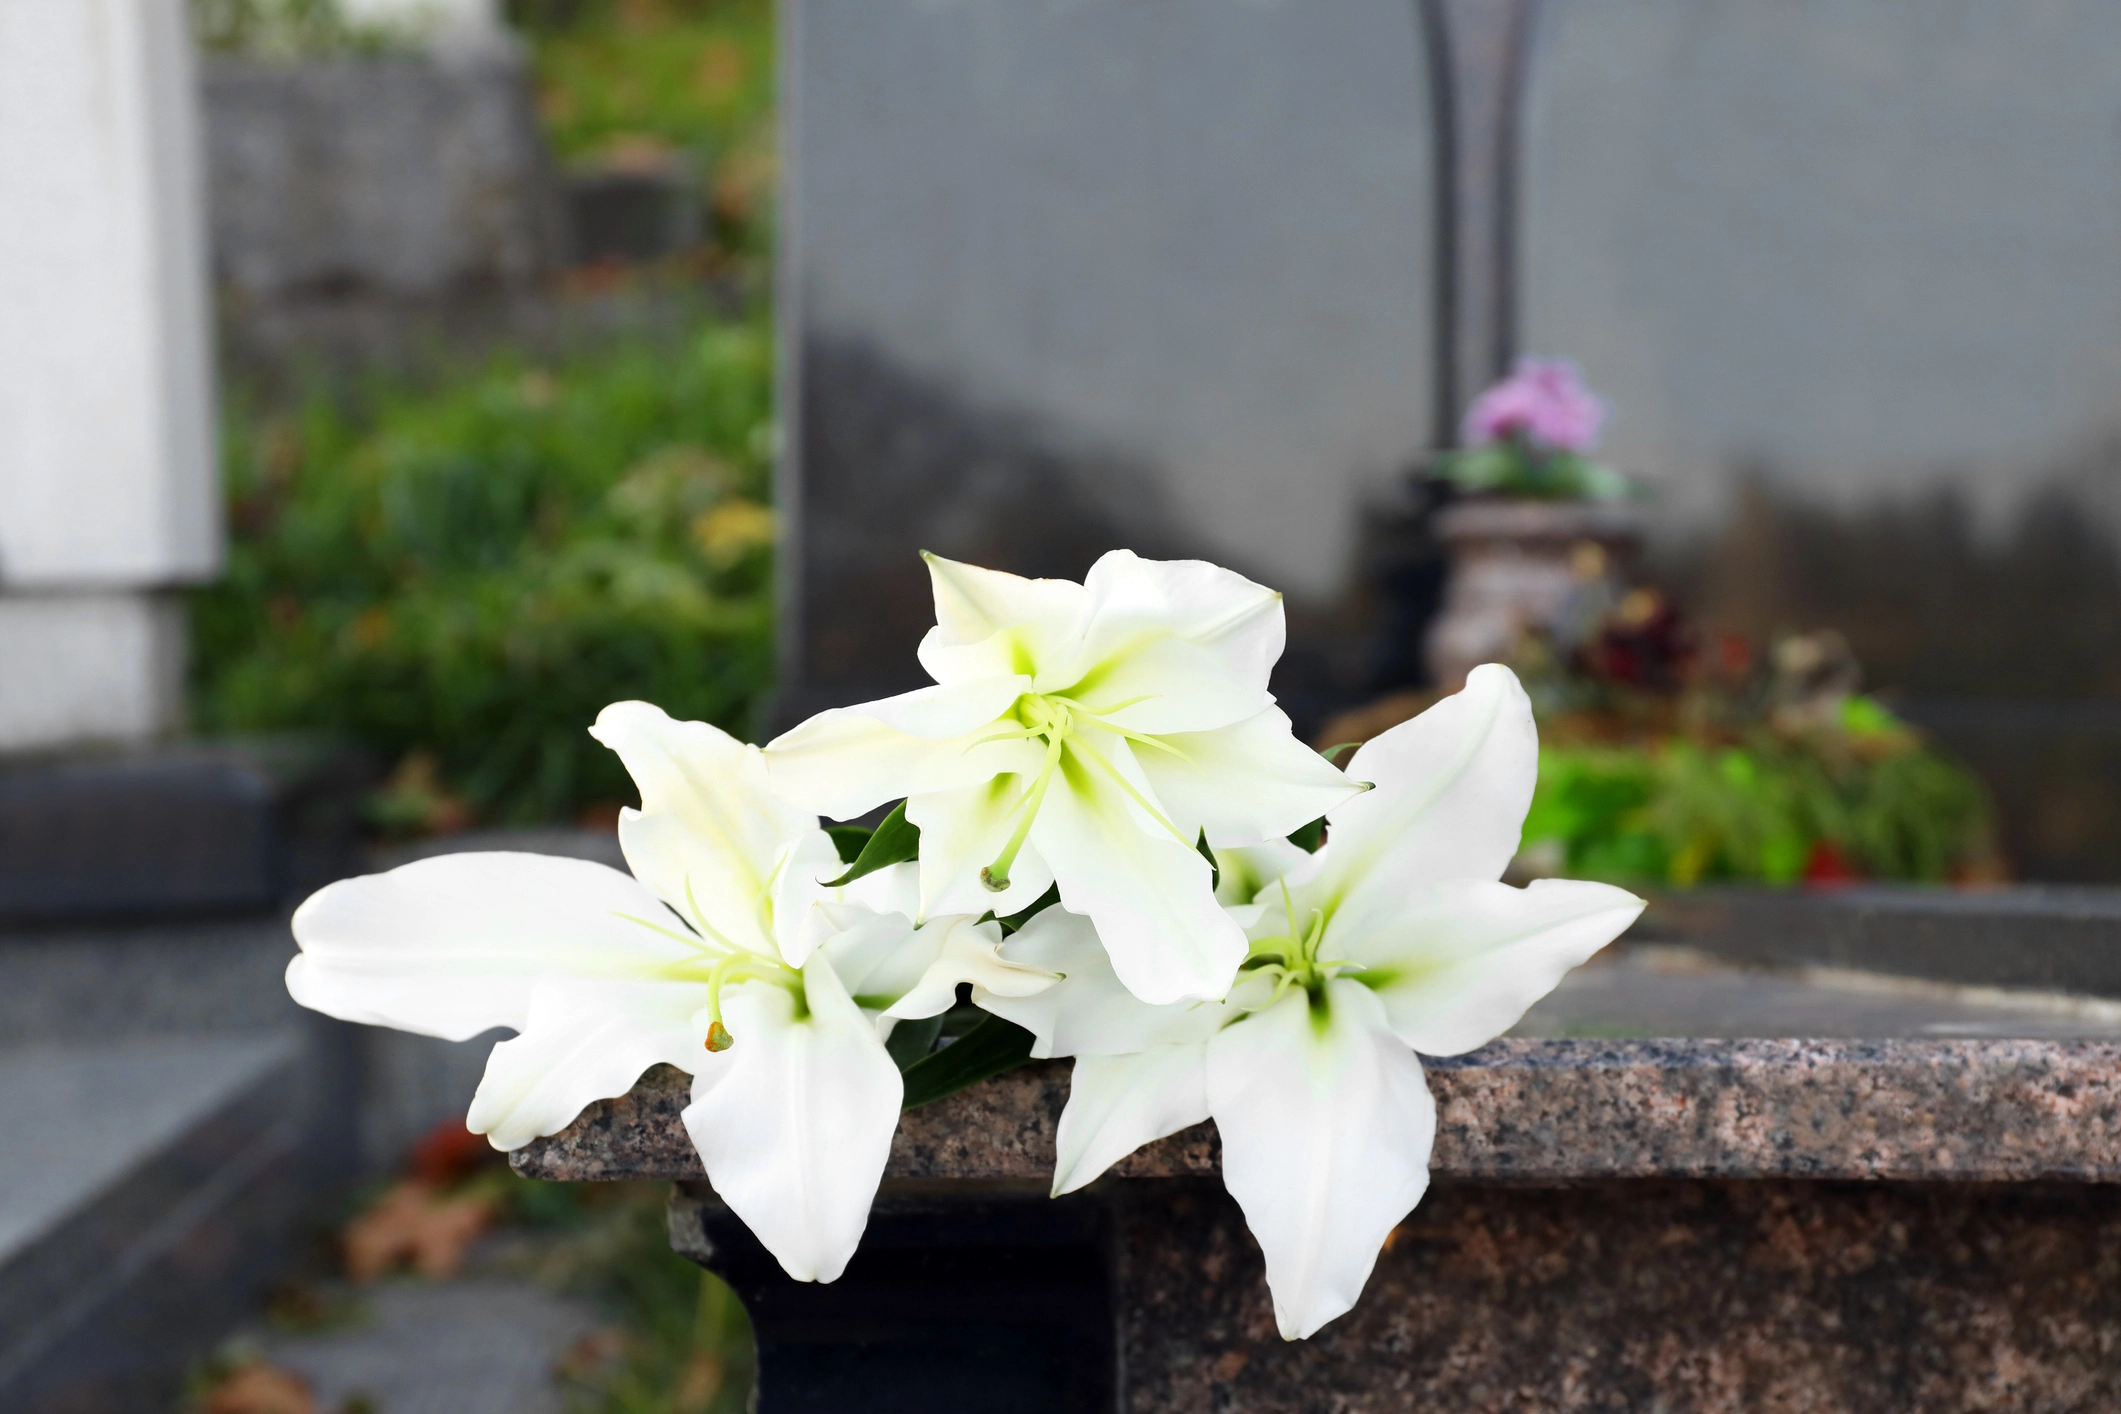 melbourne wrongful death attorney